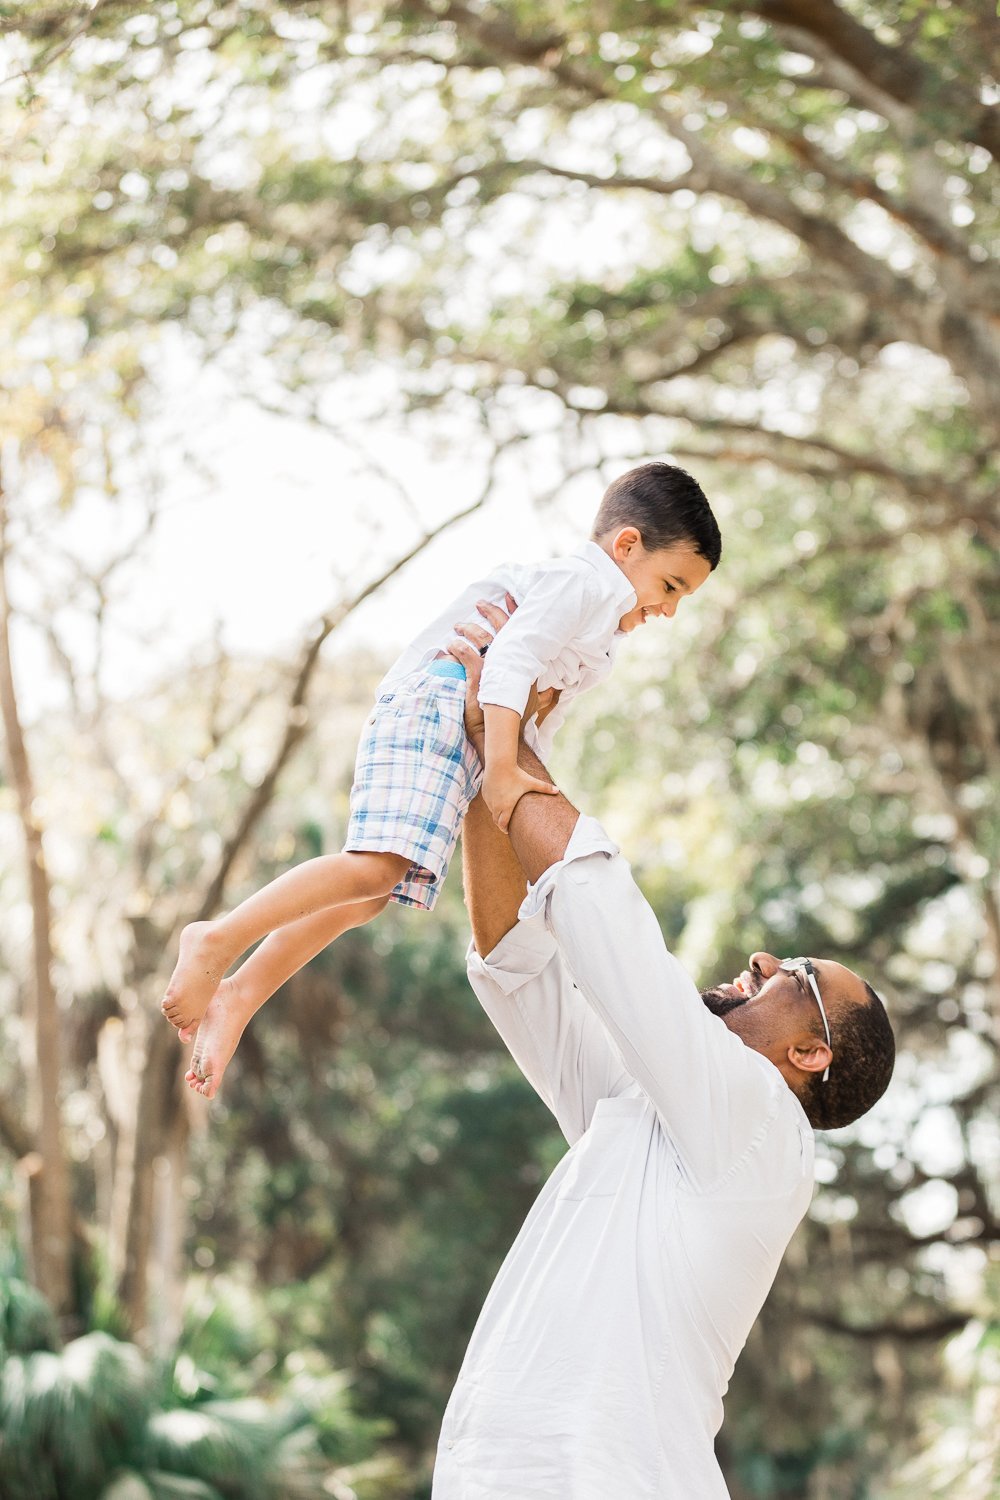 daddy and son picture ideas in jacksonville fl